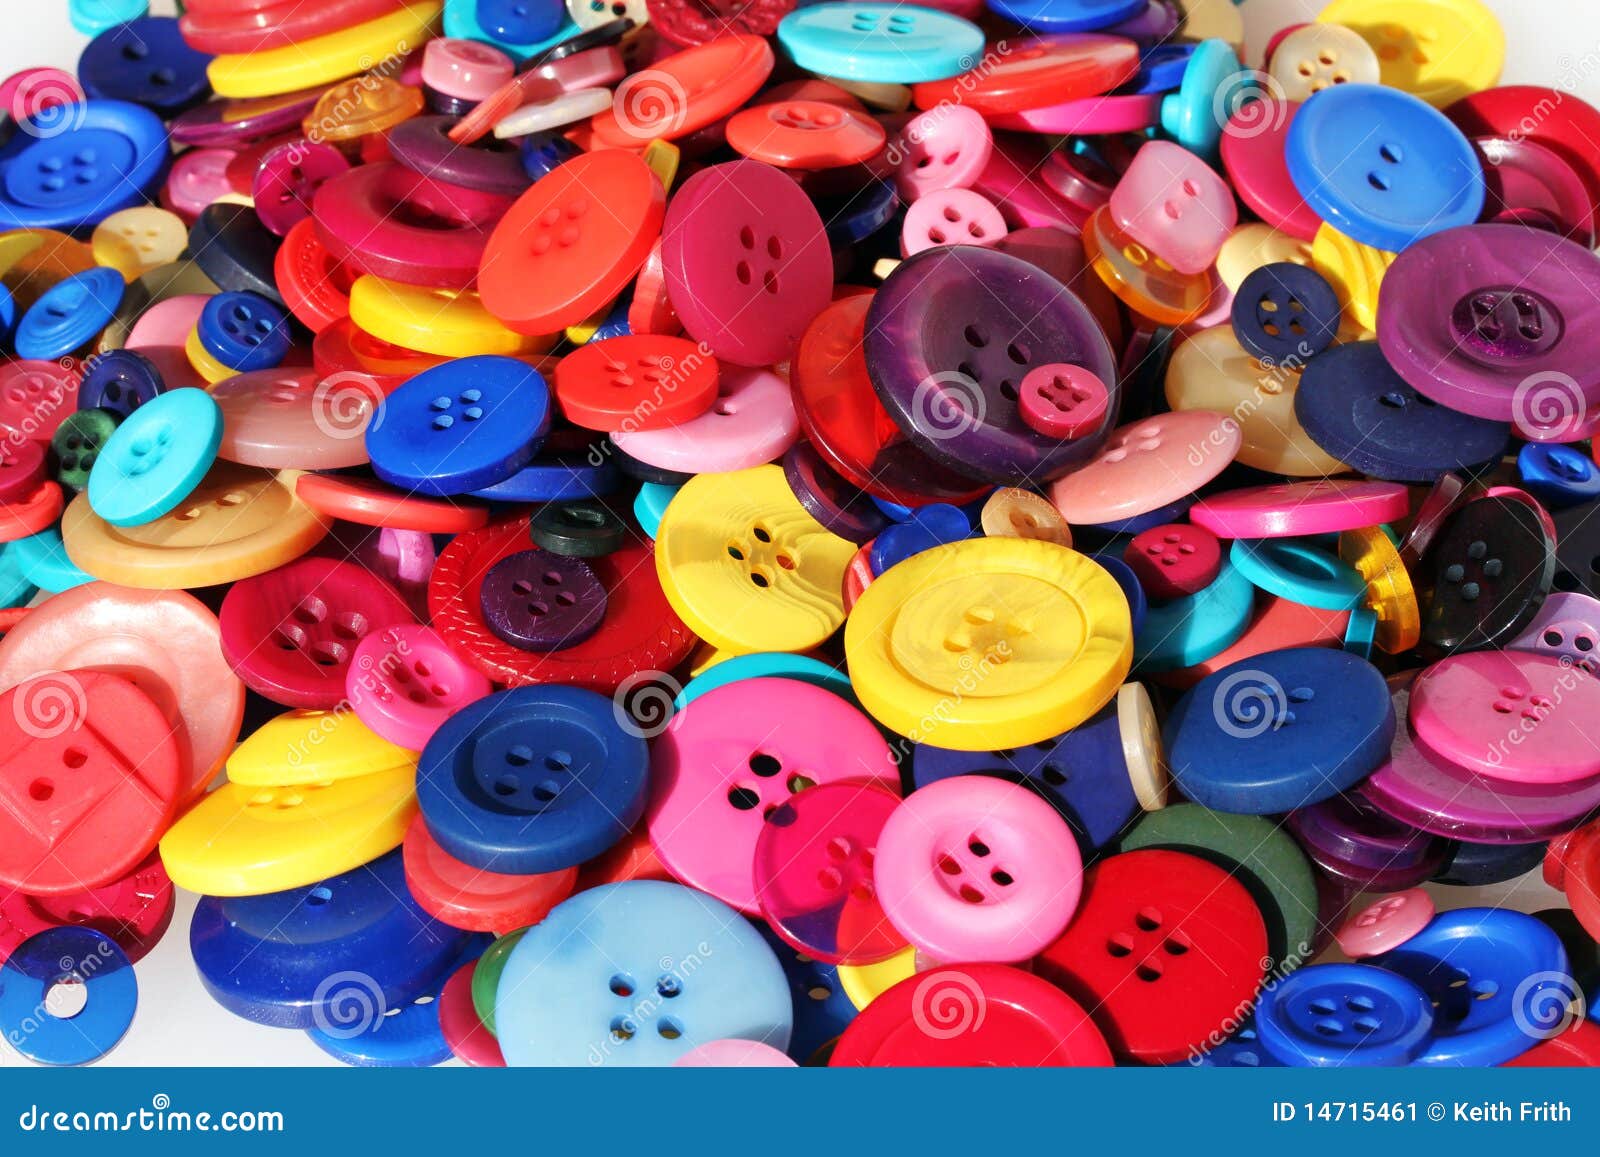 Royalty-Free photo: Pile of assorted-color buttons